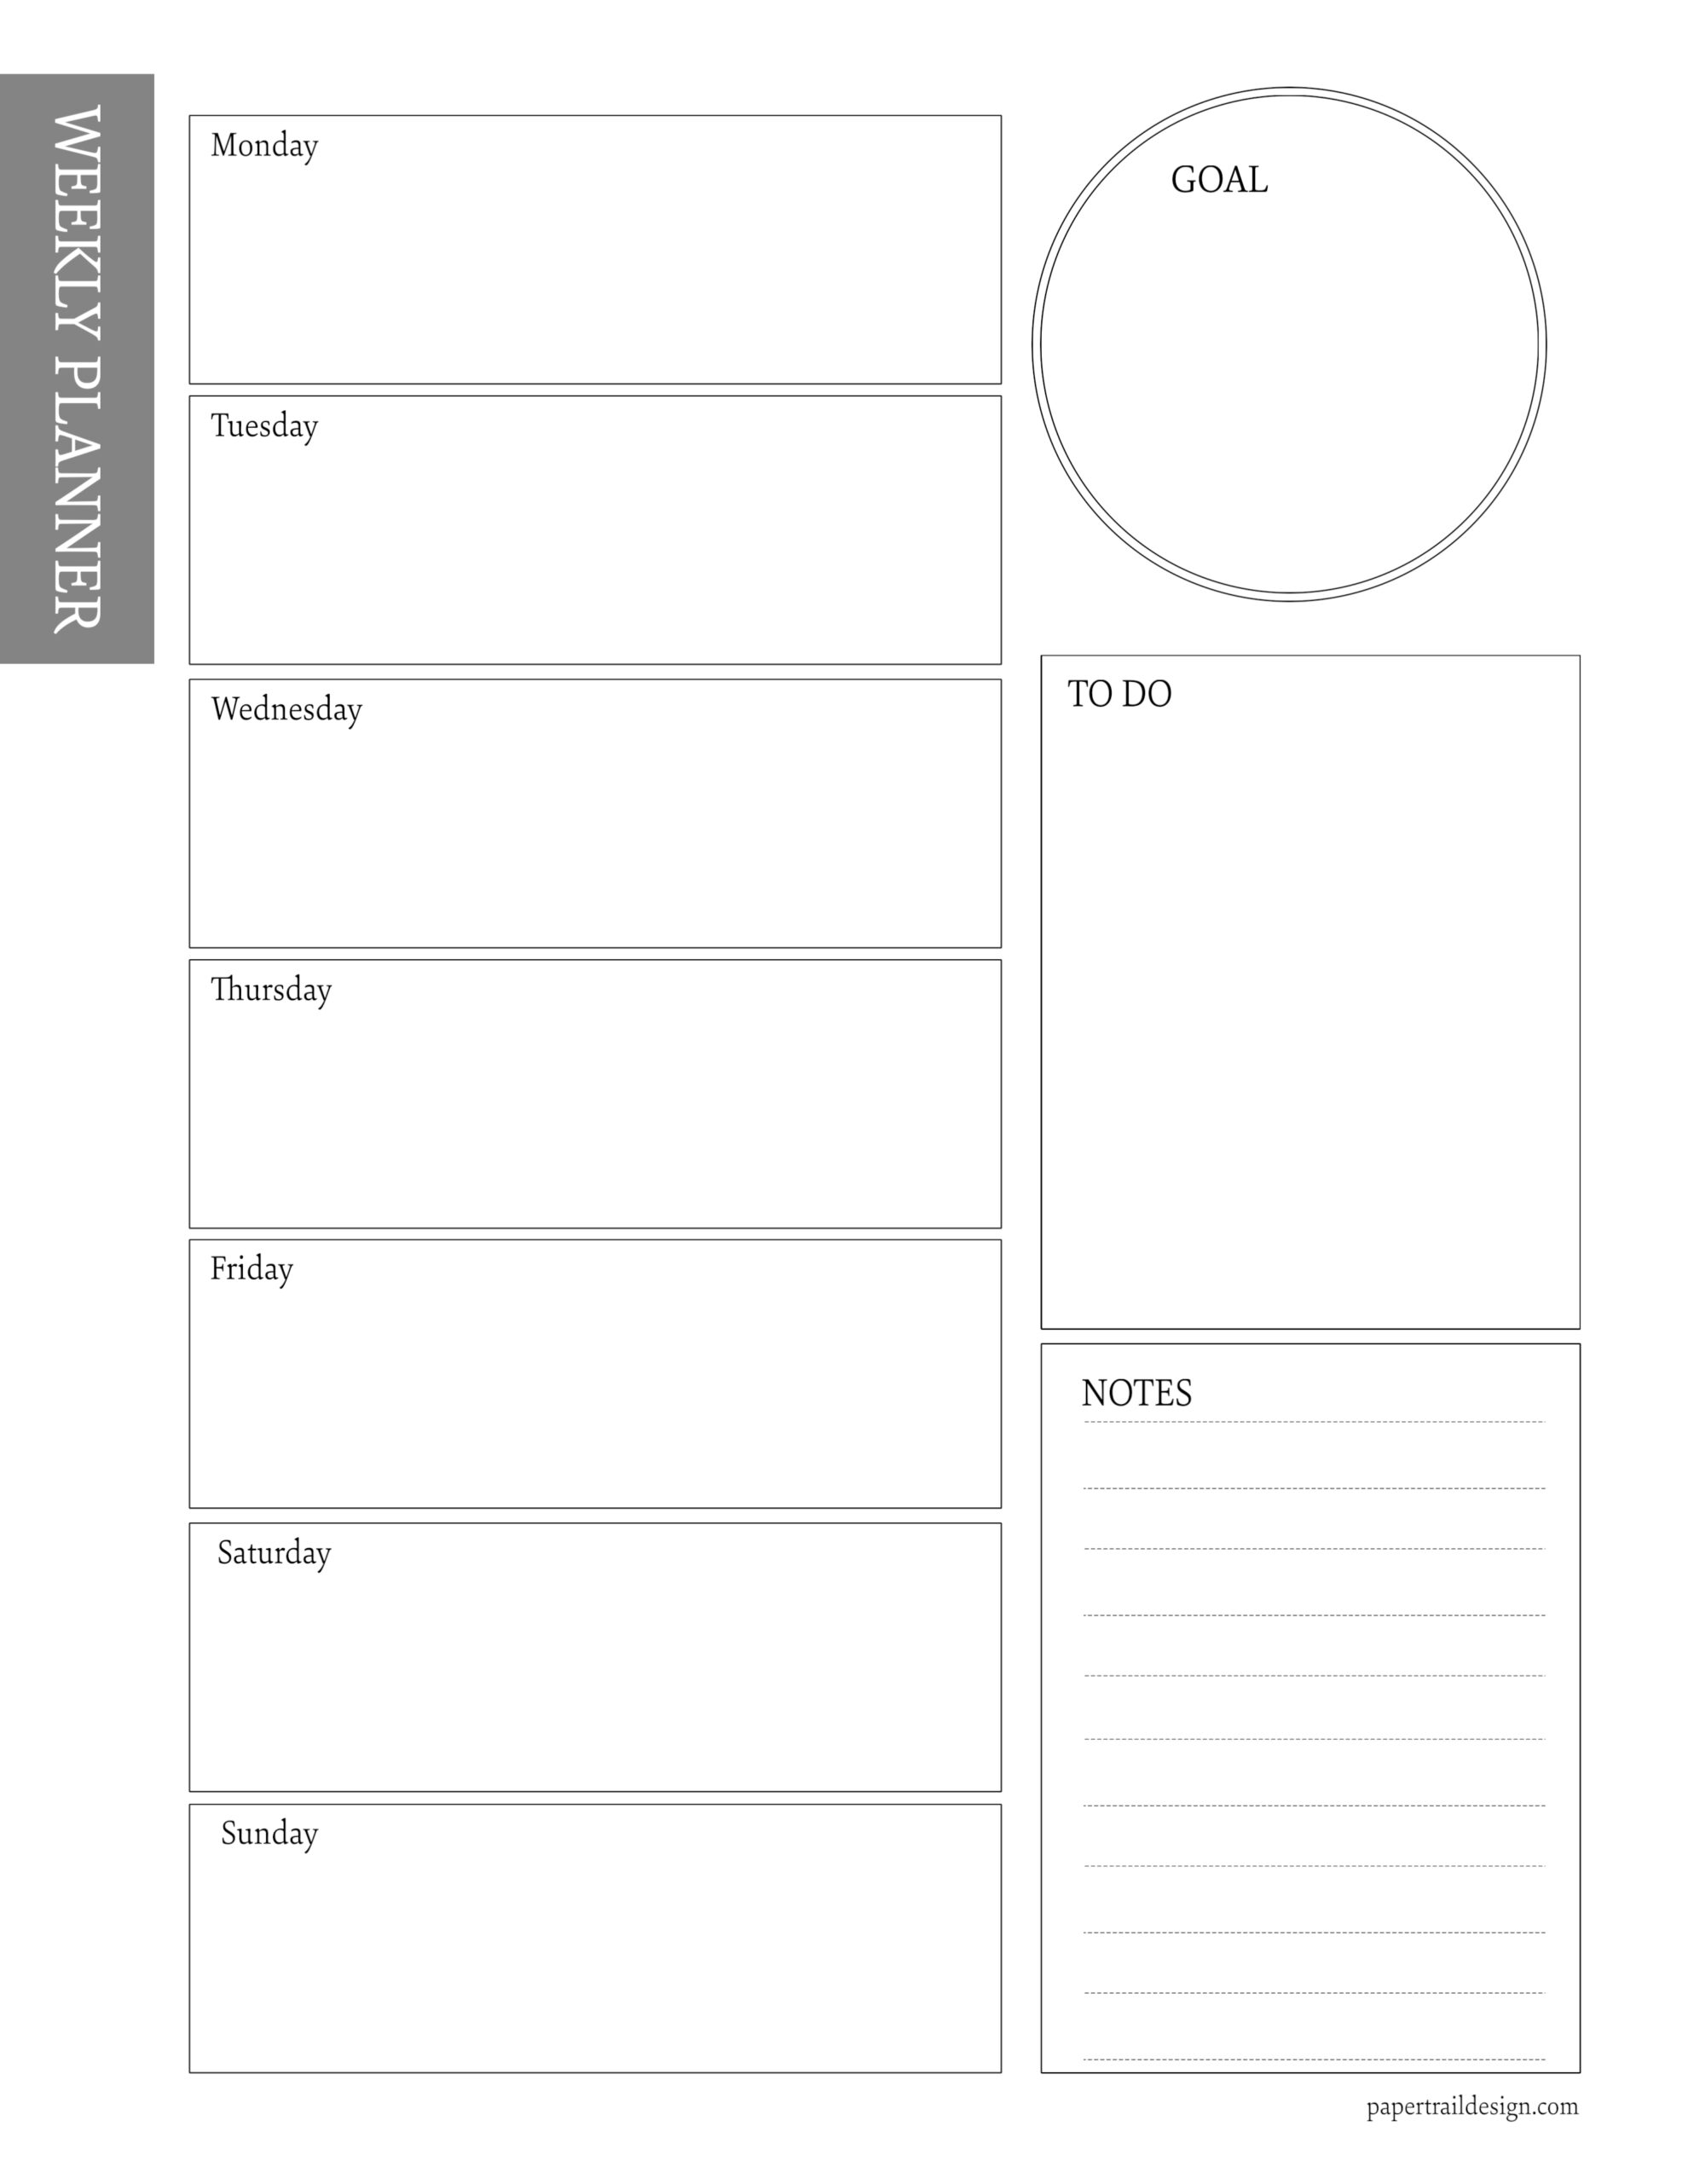 pin-by-mssmith-on-printables-downloads-weekly-planner-free